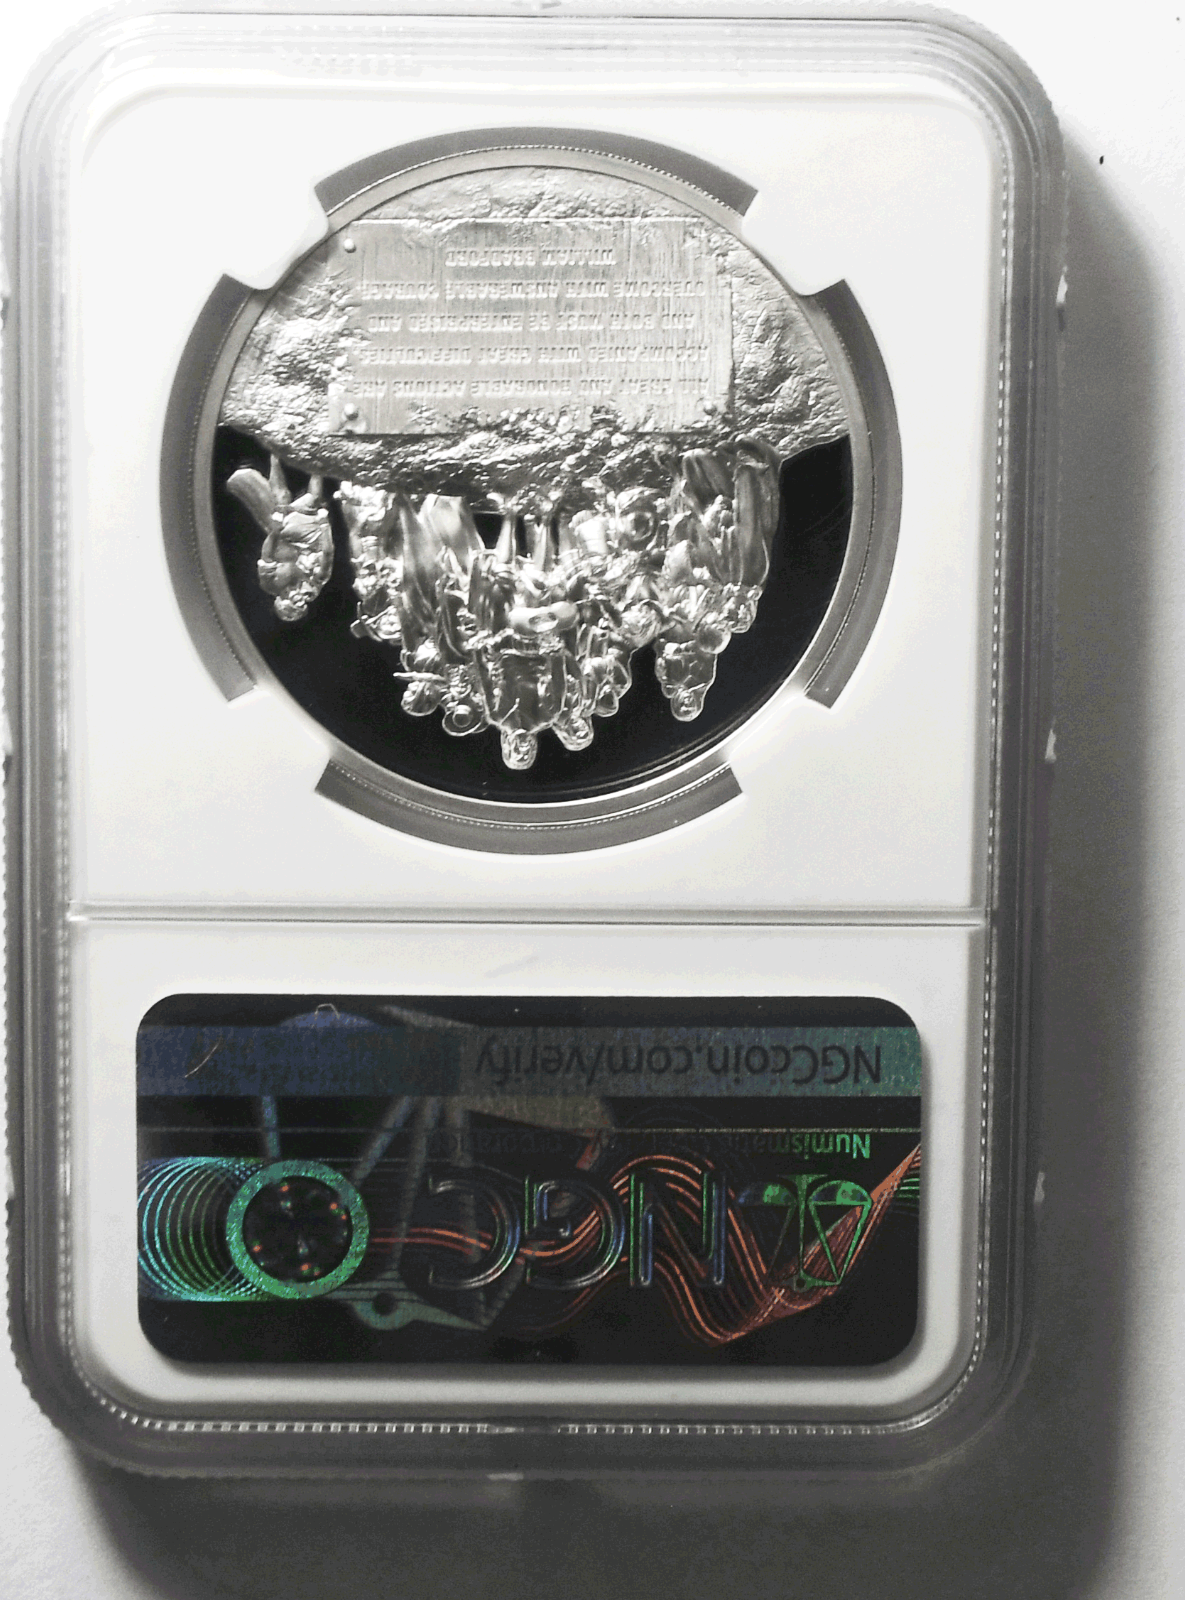 2020 Cook Islands $5 Mayflower Voyage Proof Silver Coin NGC PL70 Don Everhart